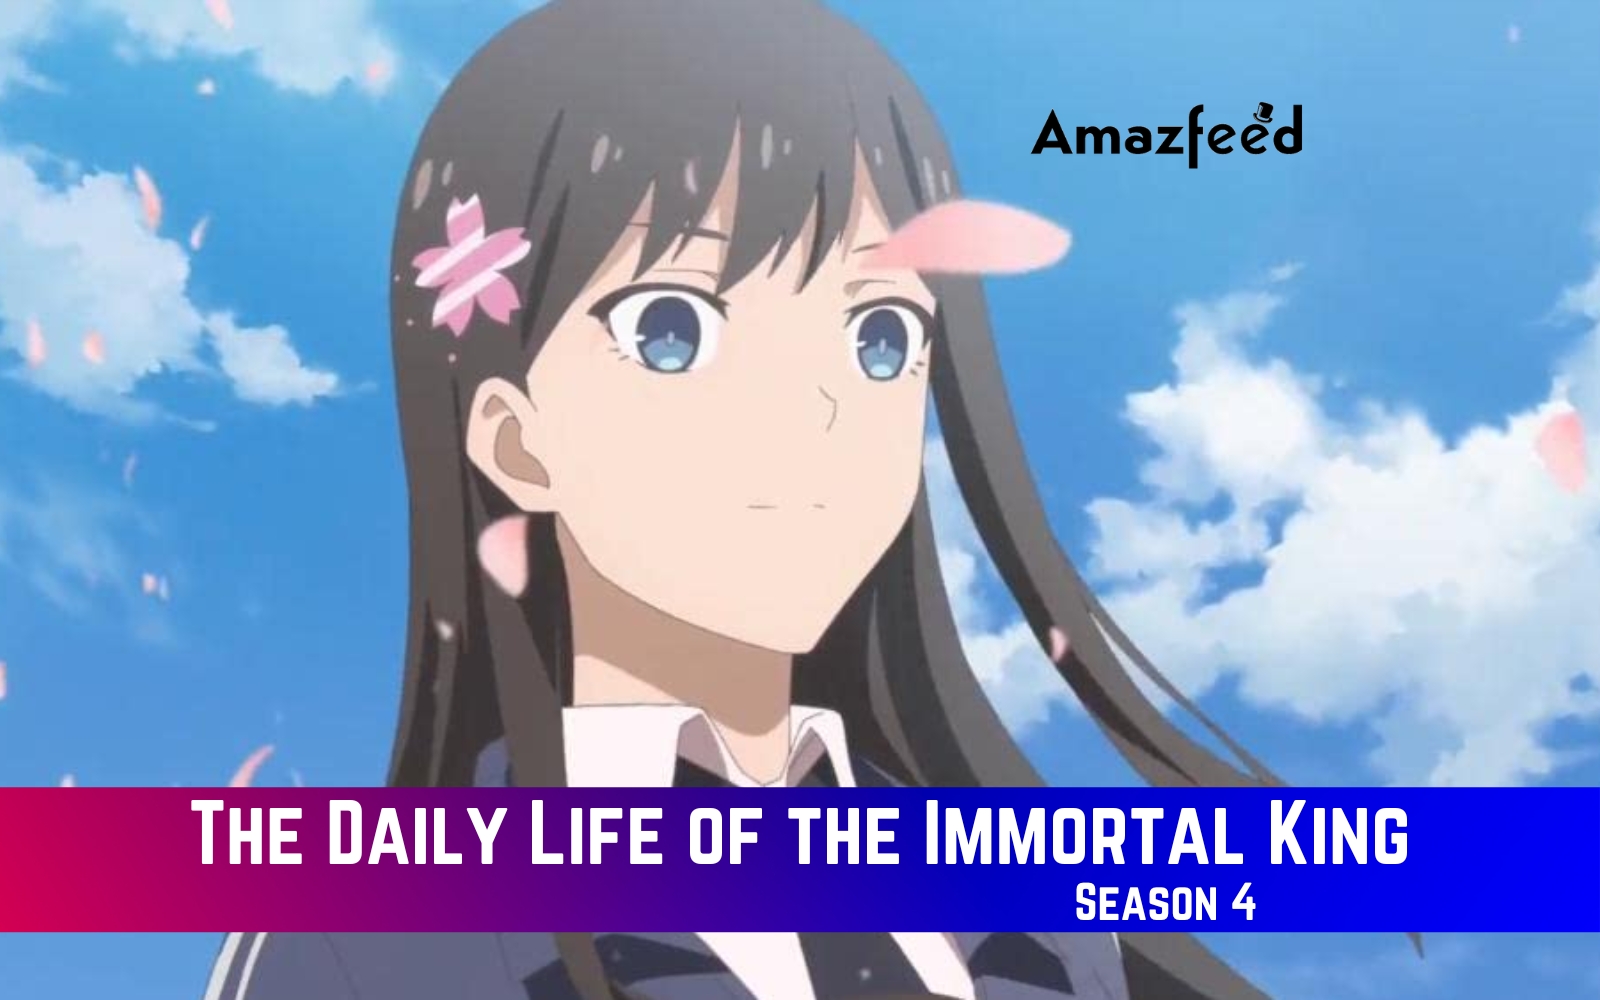 The Daily Life of an Immortal King Season 4 – release date